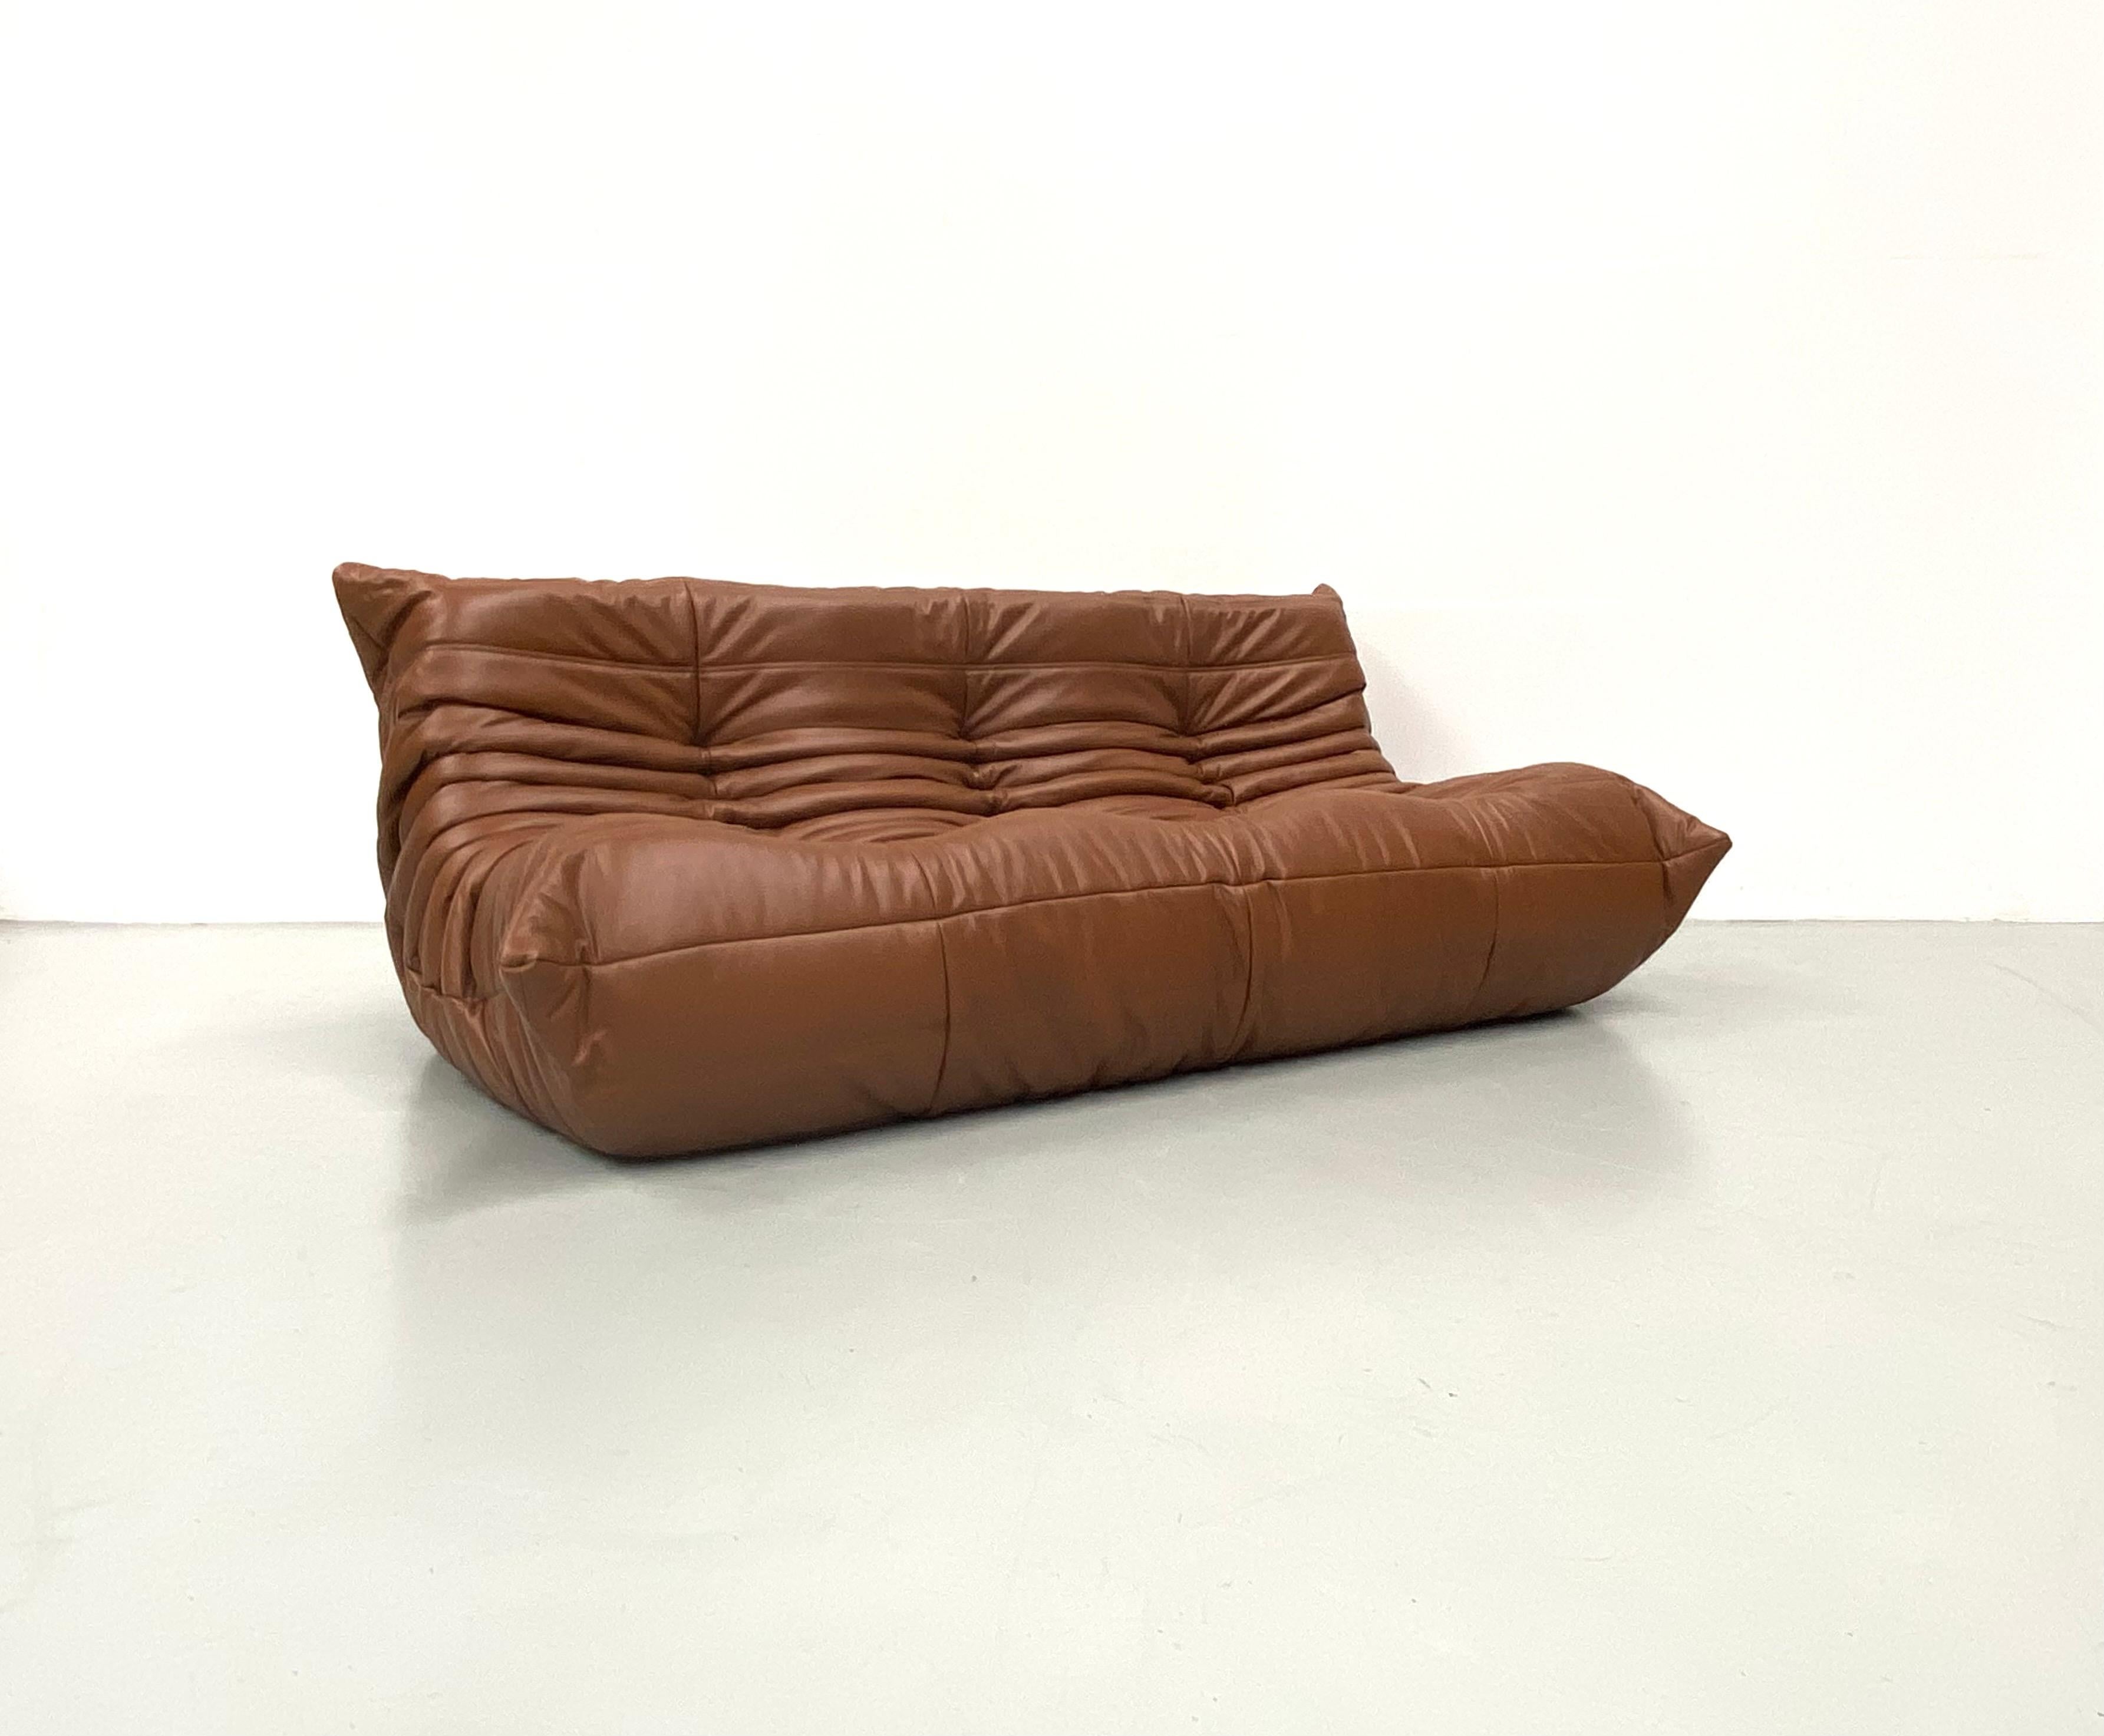 20th Century French Togo Sofa in Dark Cognac Leather by Michel Ducaroy for Ligne Roset, 1970s